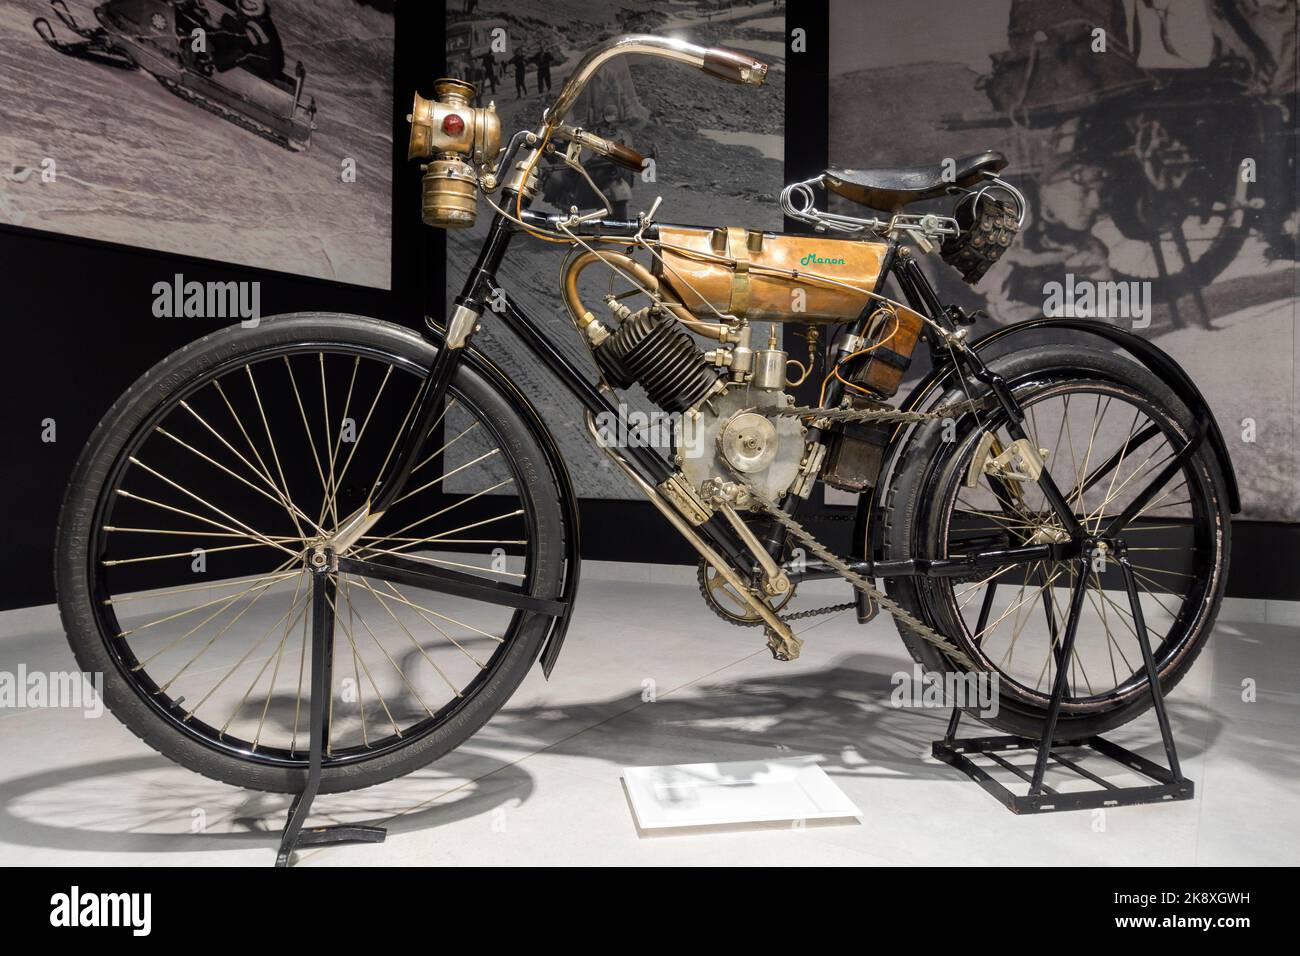 Manon motorcycle. model : type A 175cc .year:1904. Country: France.Motorcycle Museum.Canillo.Andorra Stock Photo